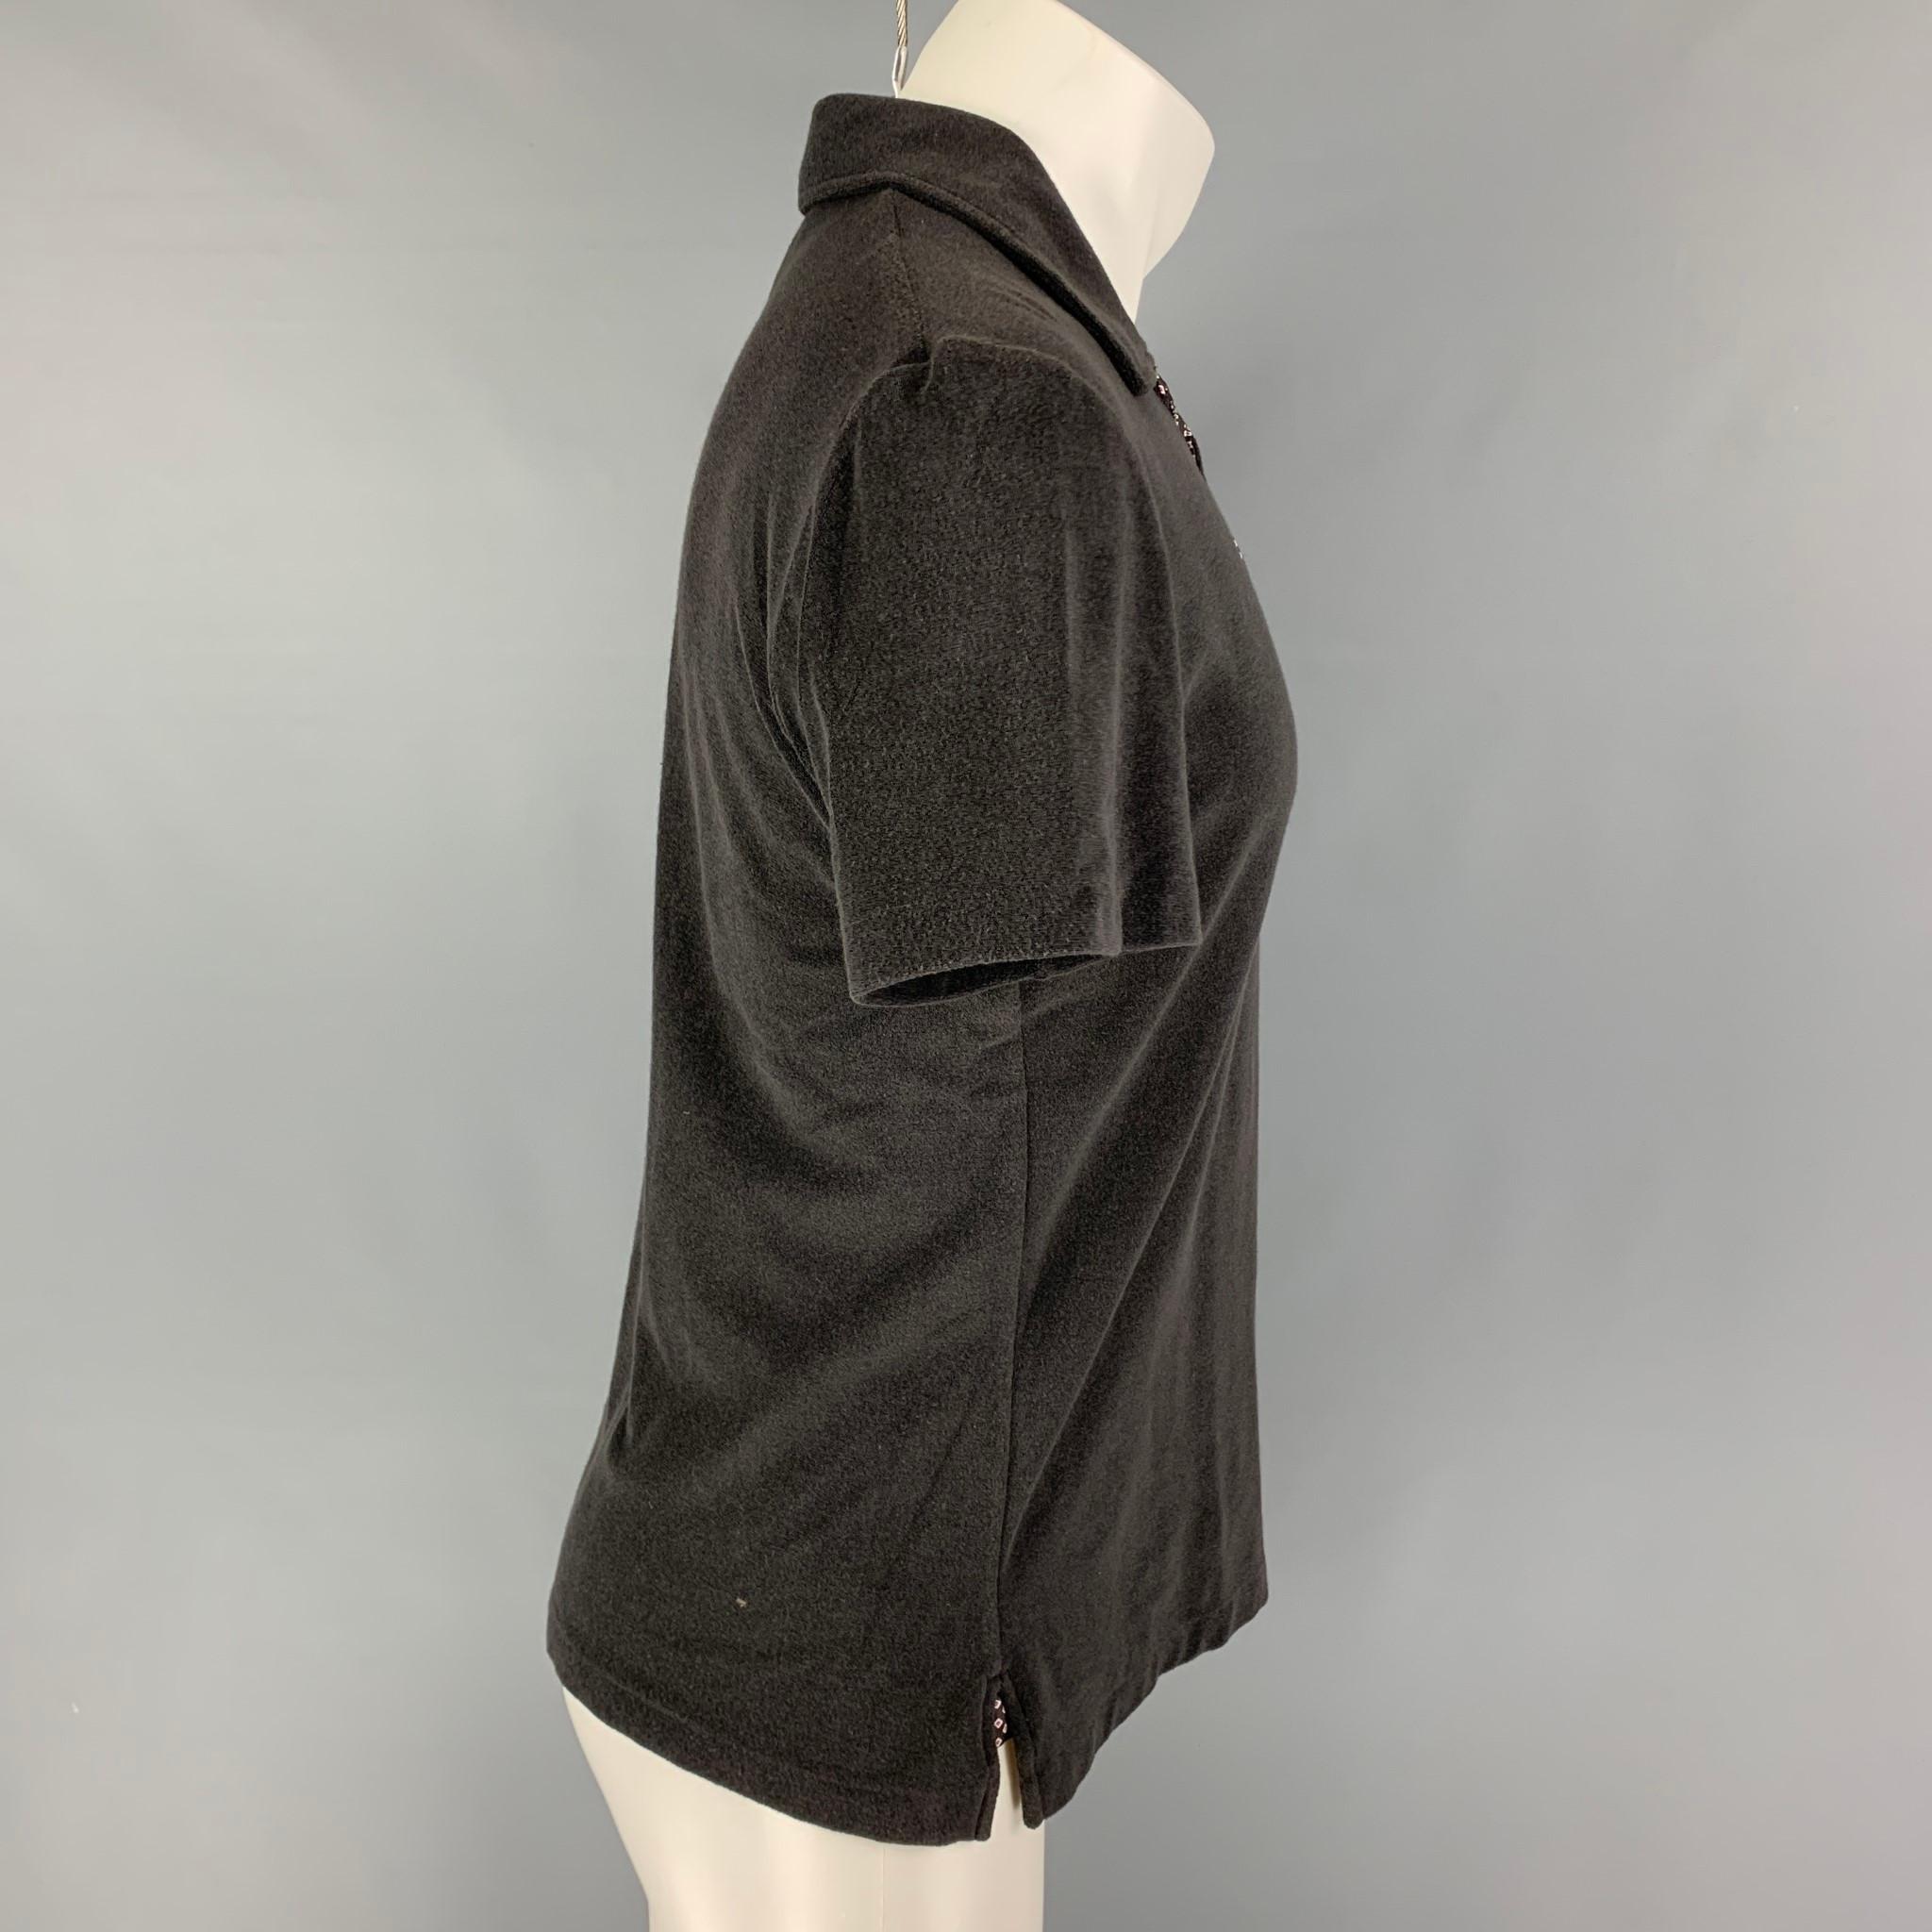 YVES SAINT LAURENT polo comes in a gray cotton featuring a spread collar, silk trim, gold tone logo emblem, and a half buttoned closure. Made in Italy. 

Good Pre-Owned Condition. Moderate discoloration at shoulders. As-Is.
Marked: